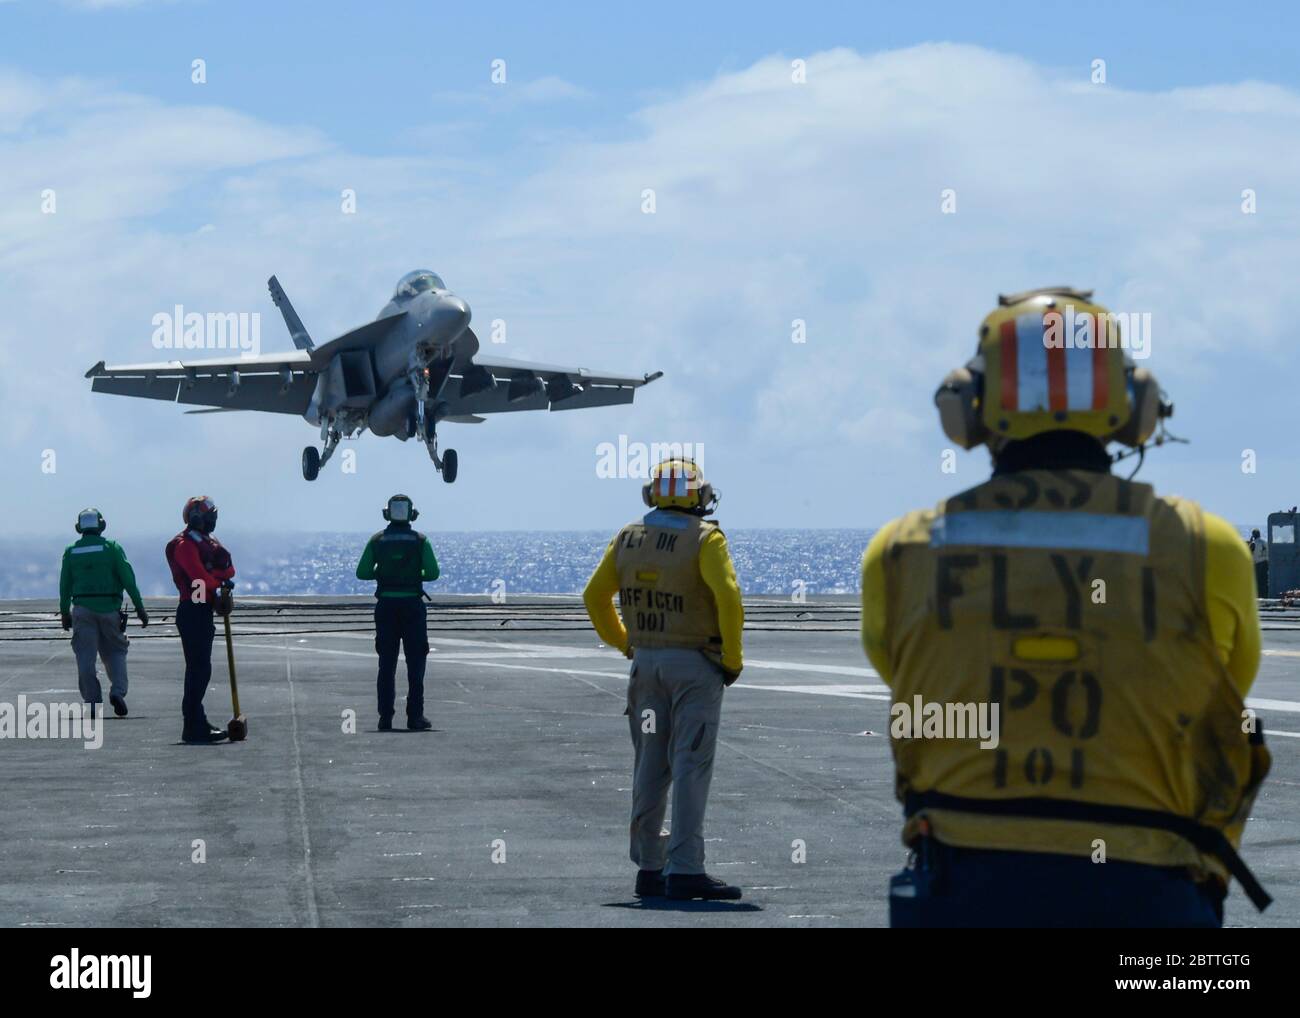 A U.S. Navy F/A-18F Super Hornet fighter aircraft, assigned to the Black Knights of VFA 154, approaches to land on the flight deck of the Nimitz-class aircraft carrier USS Theodore Roosevelt May 26, 2020 in the Philippine Sea. The COVID-negative crew returned from quarantine and the ship has continued their scheduled deployment to the Indo-Pacific. Stock Photo